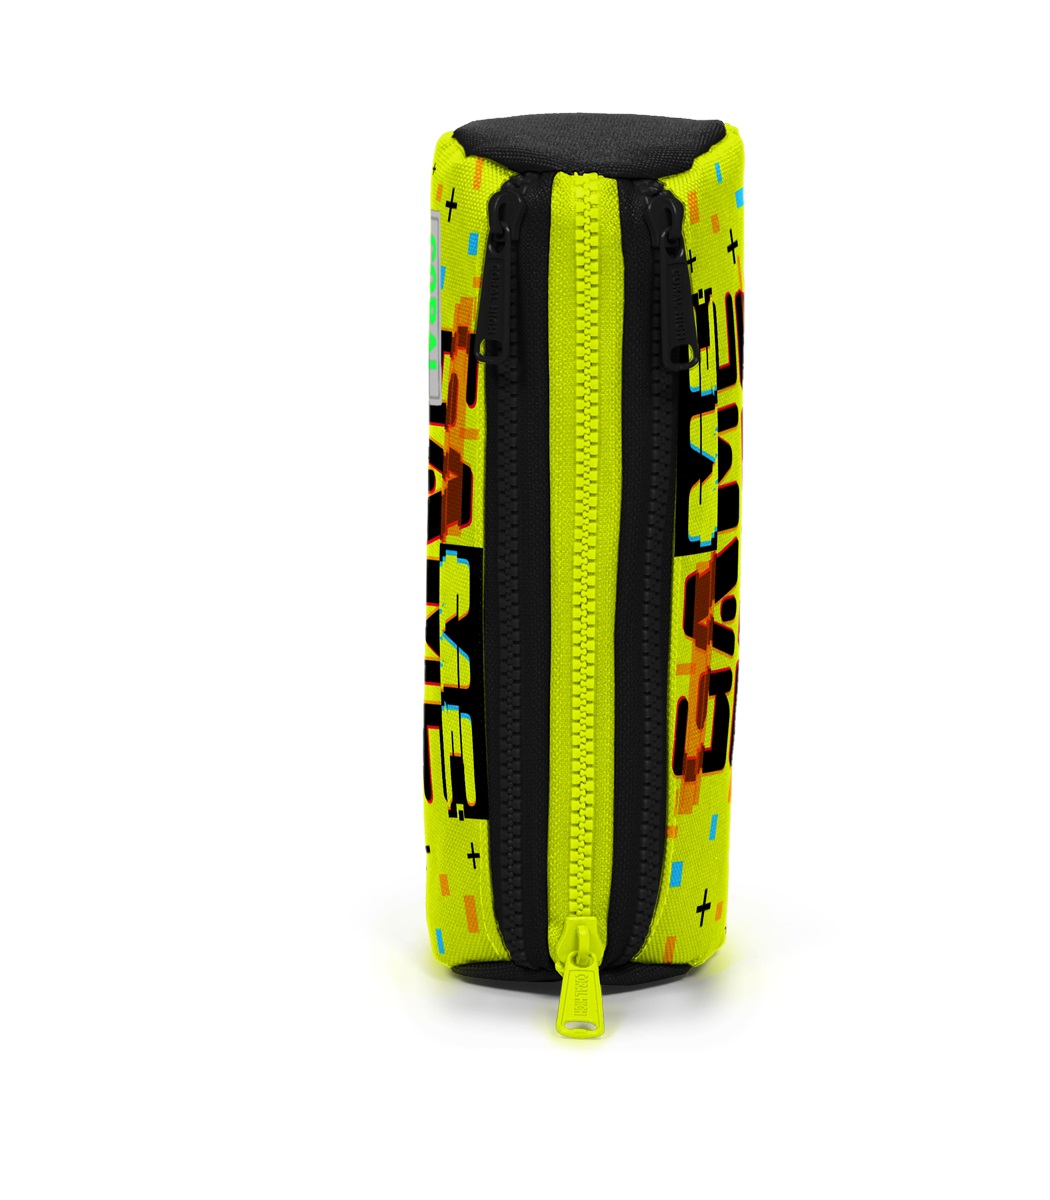 Coral High Kids Three Compartment Pencil case - Black Neon Yellow Game Over Patterned